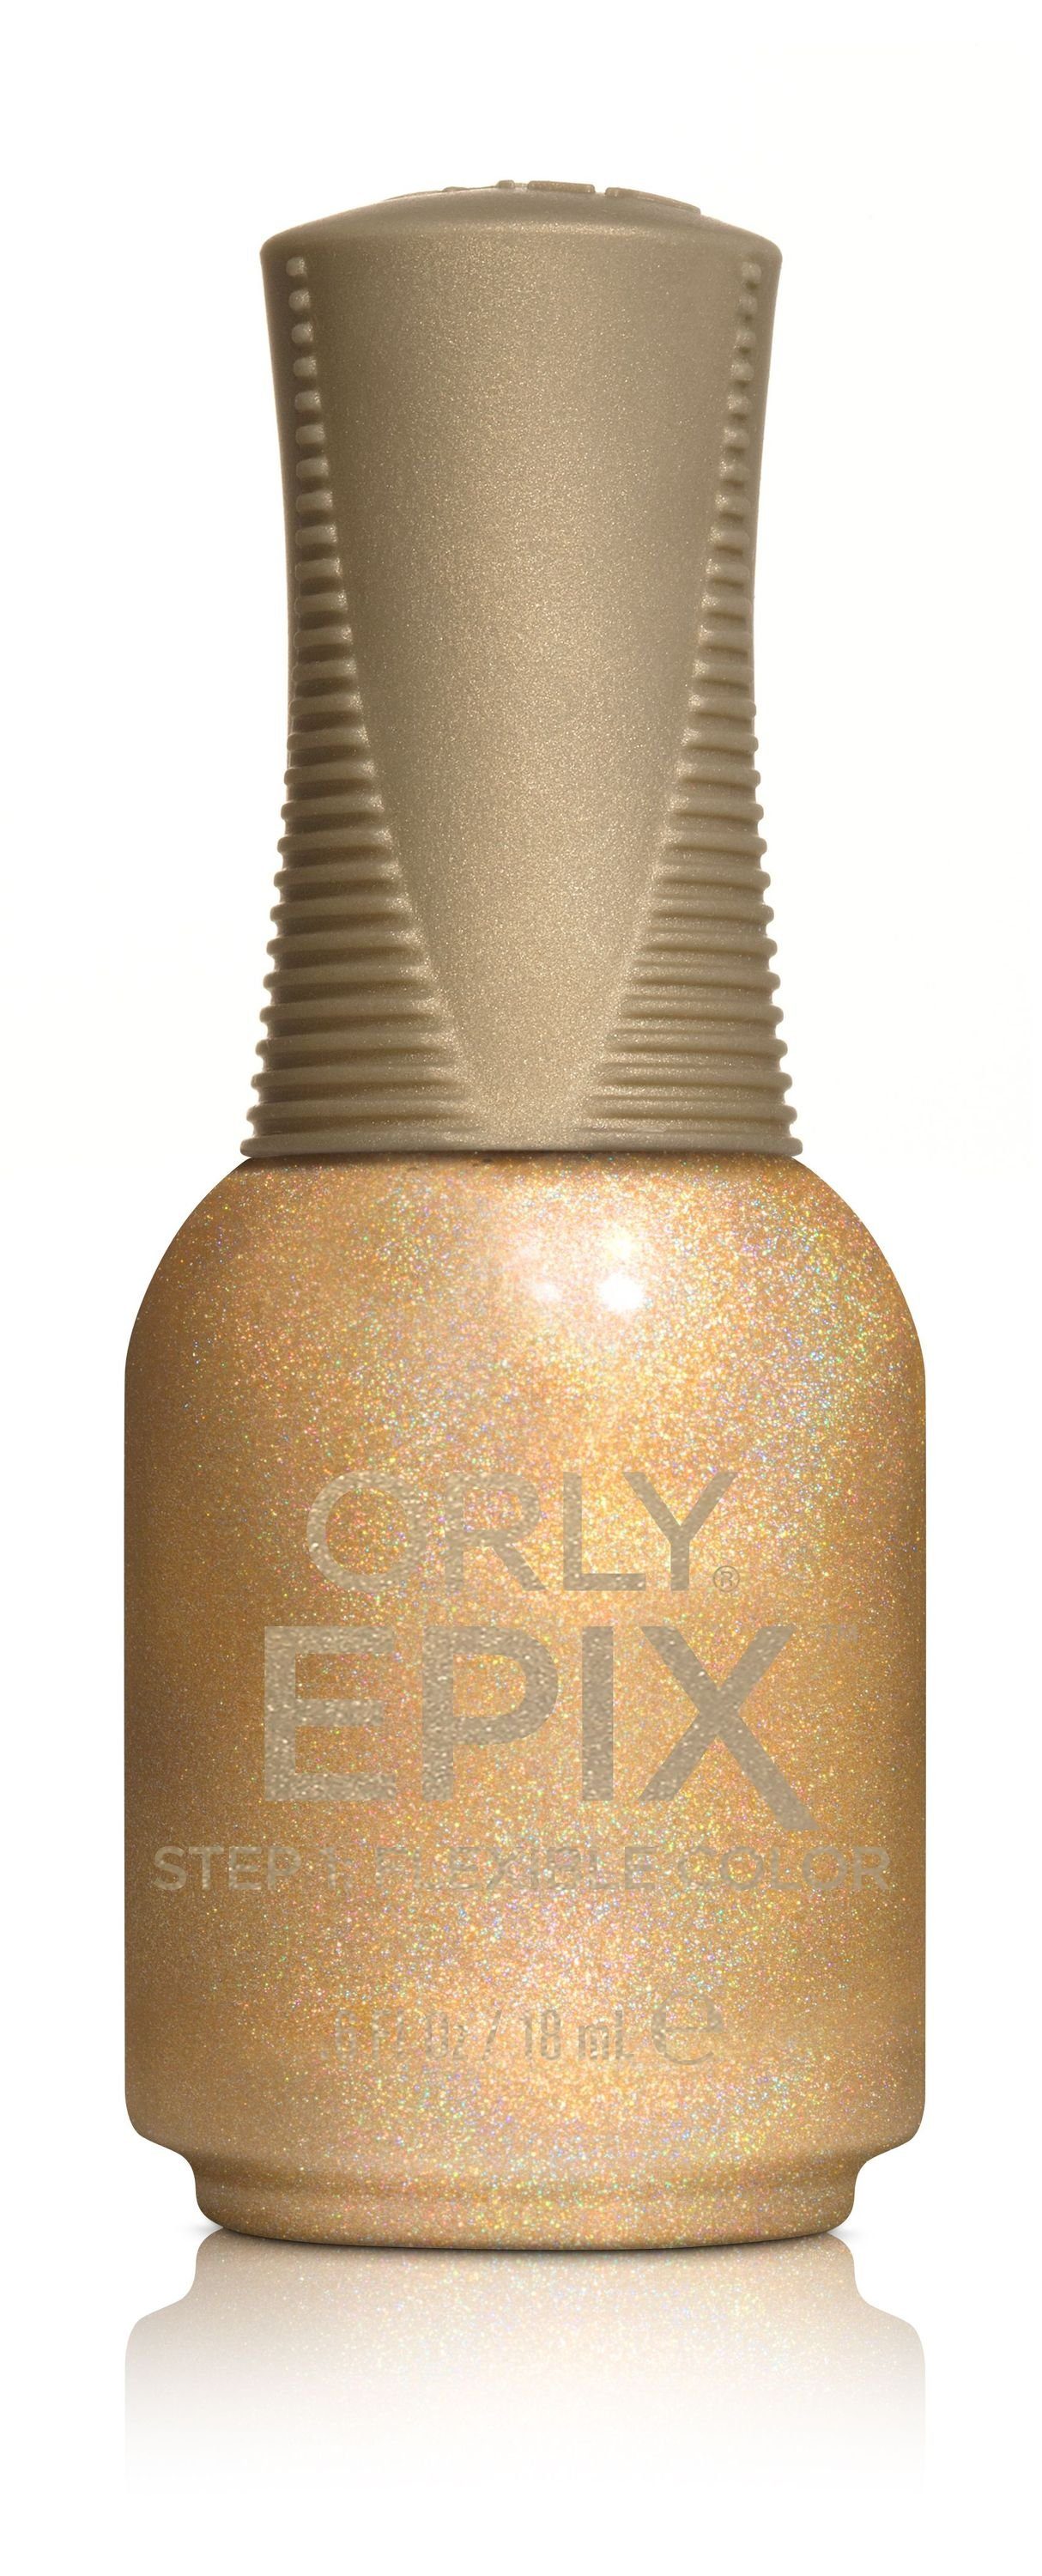 Special 18 ORLY - ORLY Flexible - ML EPIX Color Nagellack Effects,